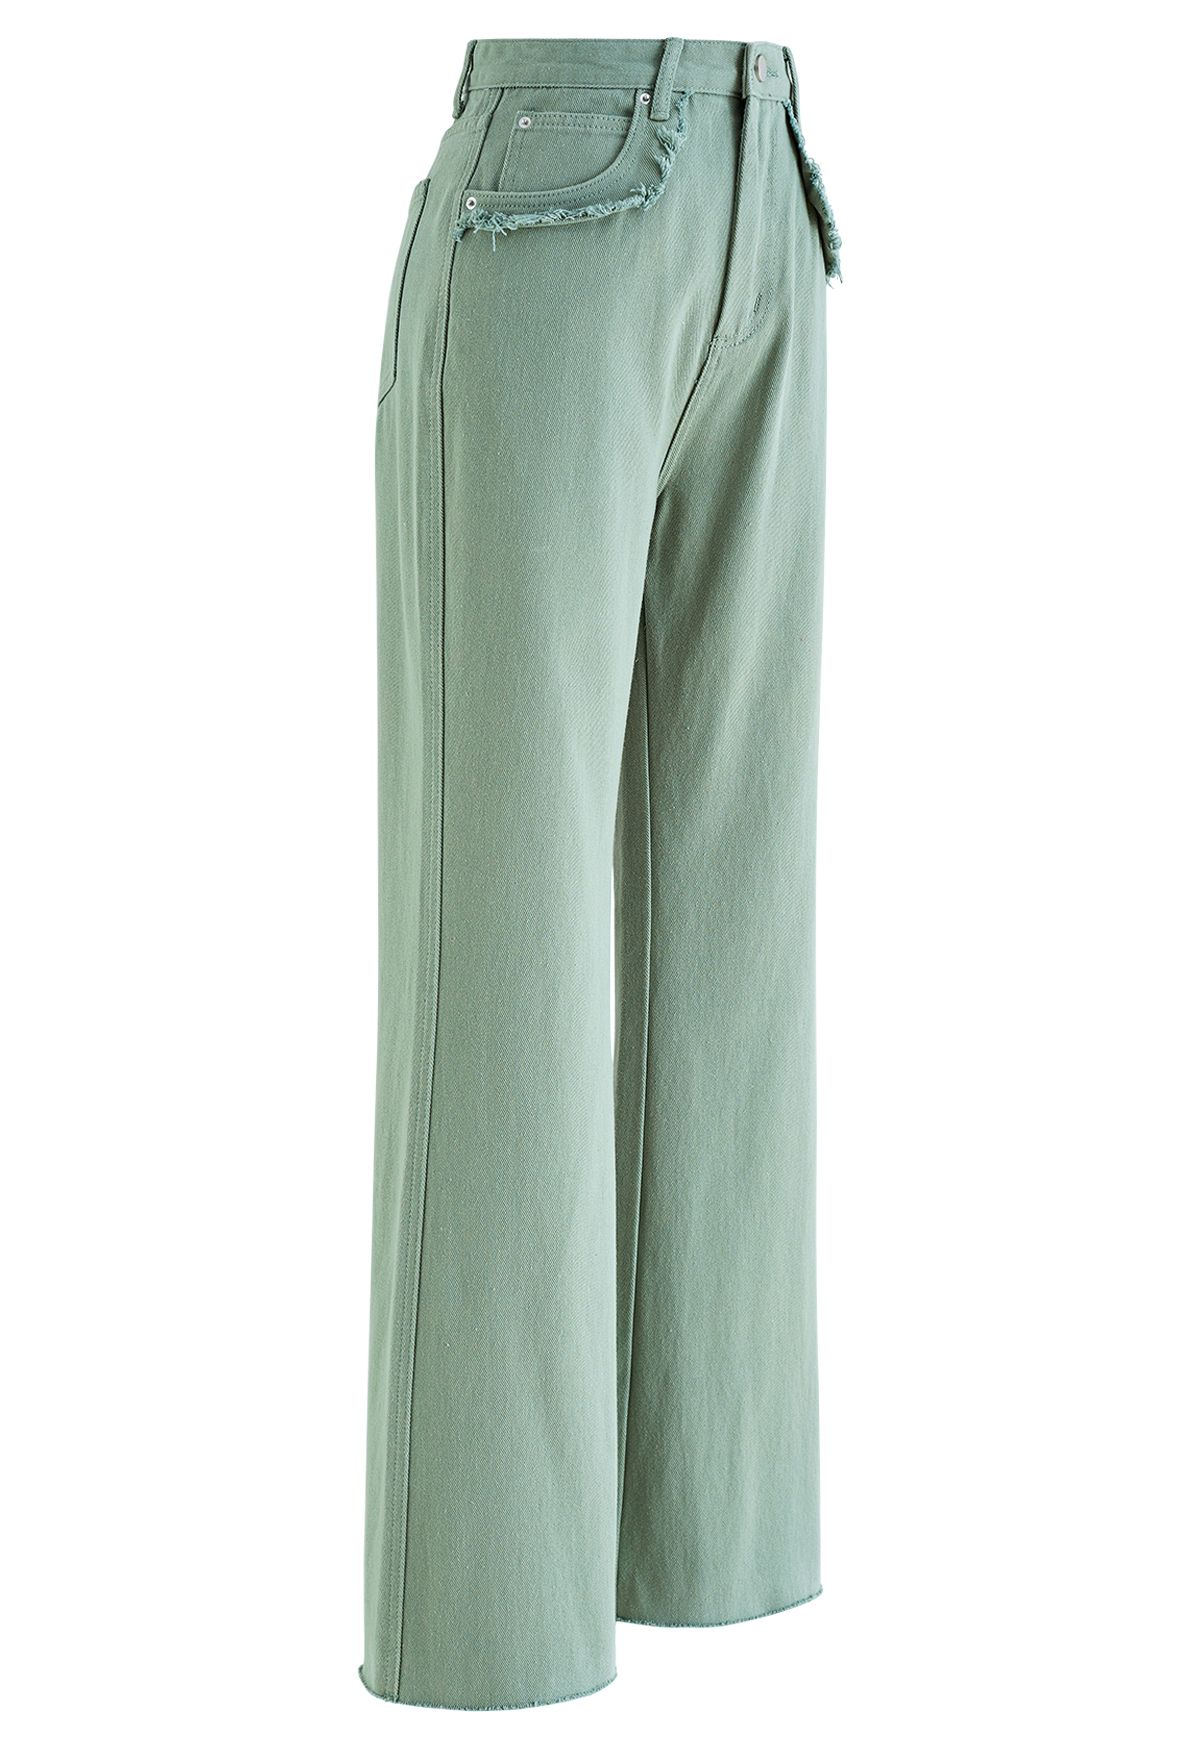 Classic Pocket Frayed Detail Flare Jeans in Sage